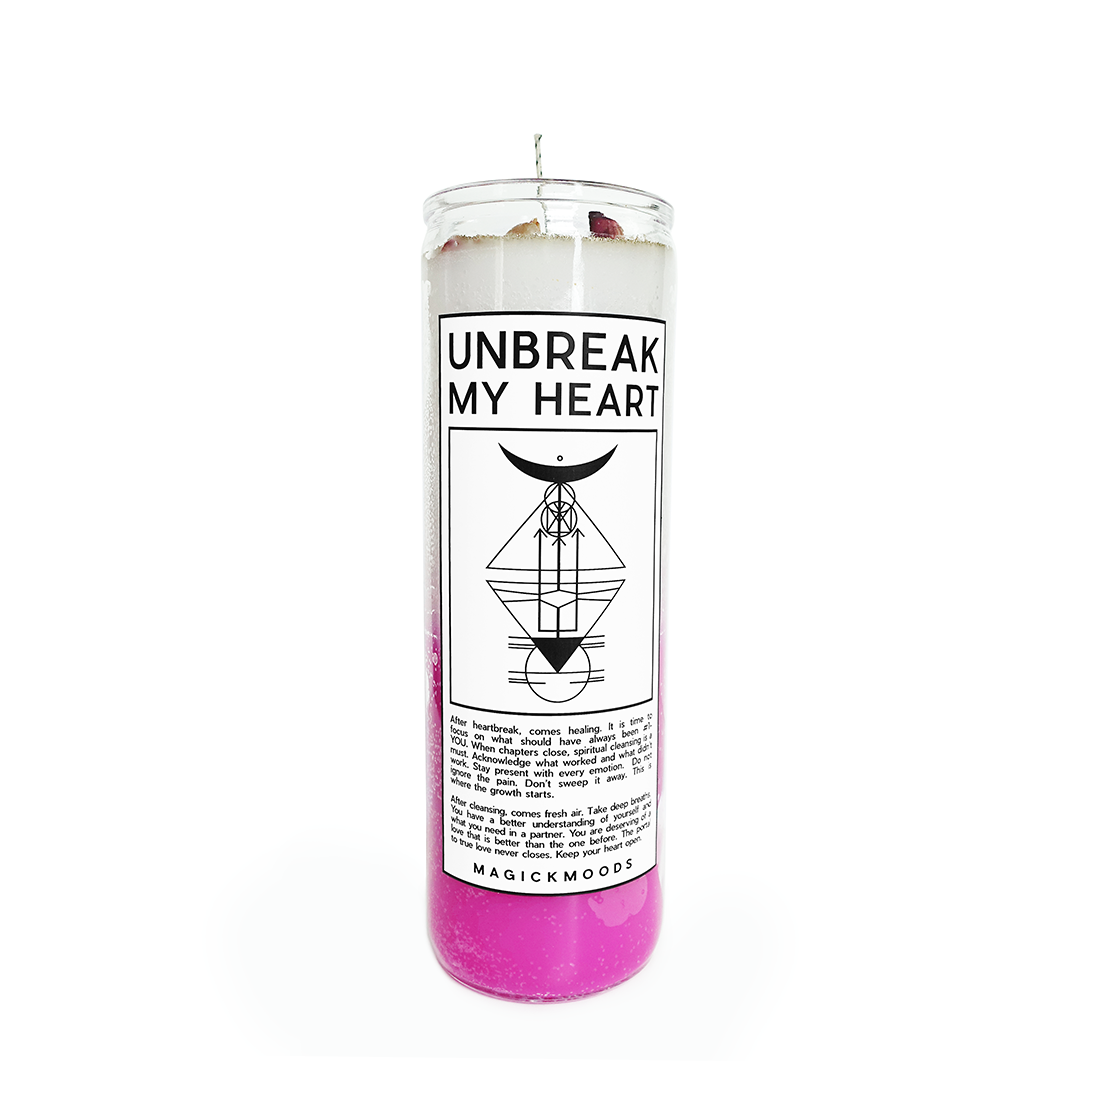 Unbreak My Heart 7-Day Meditation Candle - PREORDER - Ships by July 28th, 2023